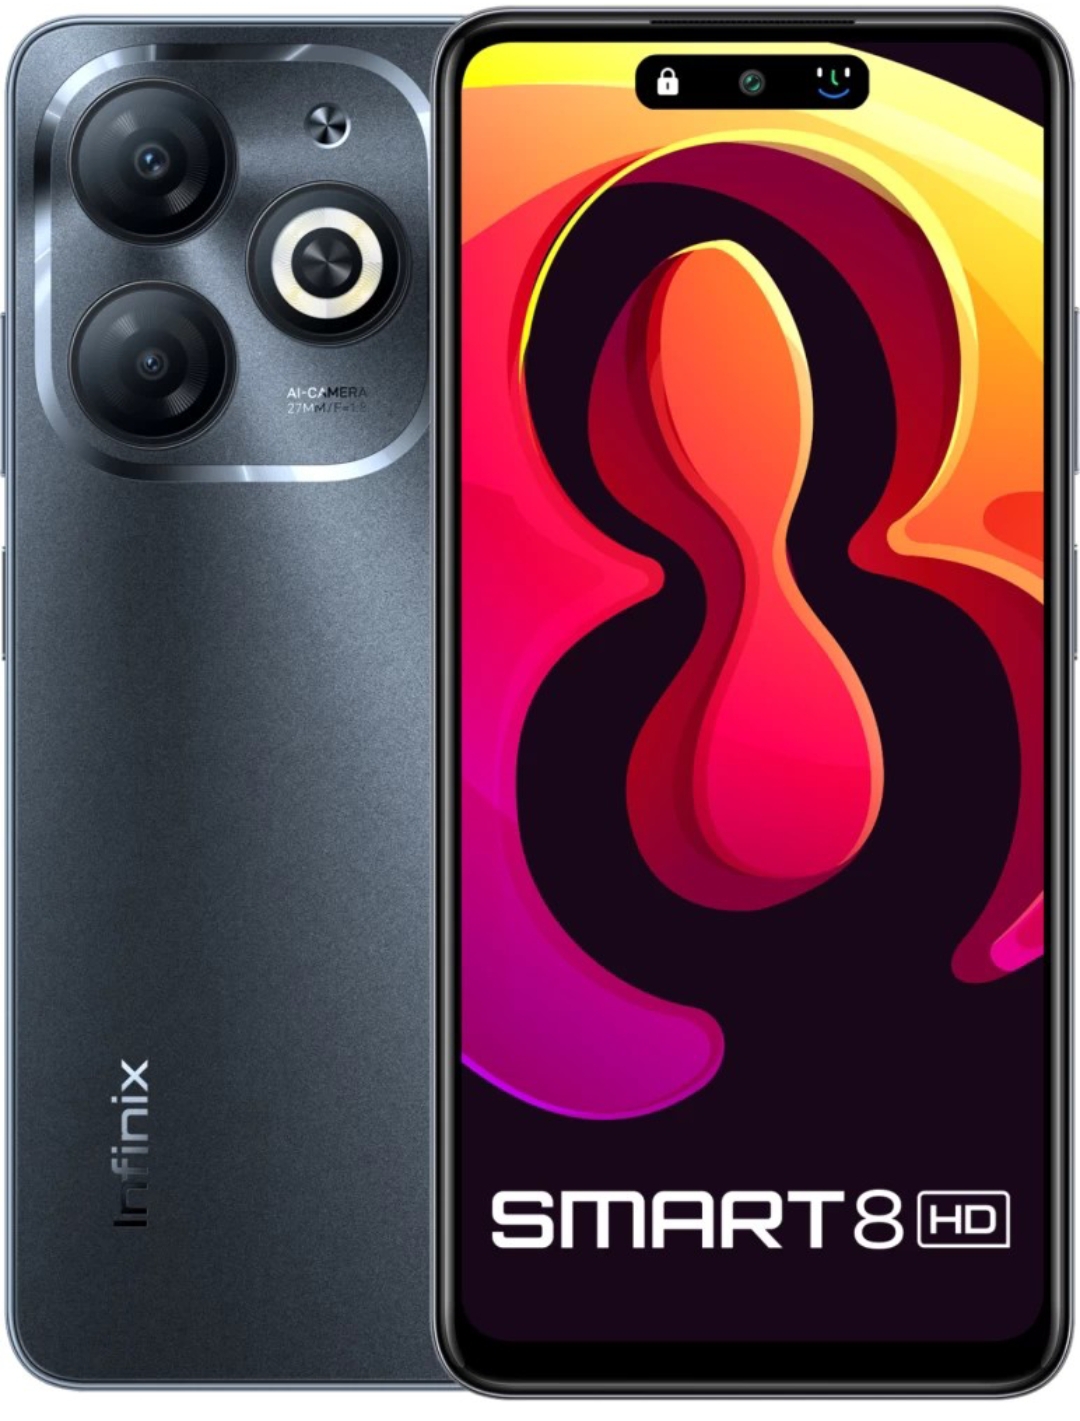 Infinix Smart 8 HD Specification and Price